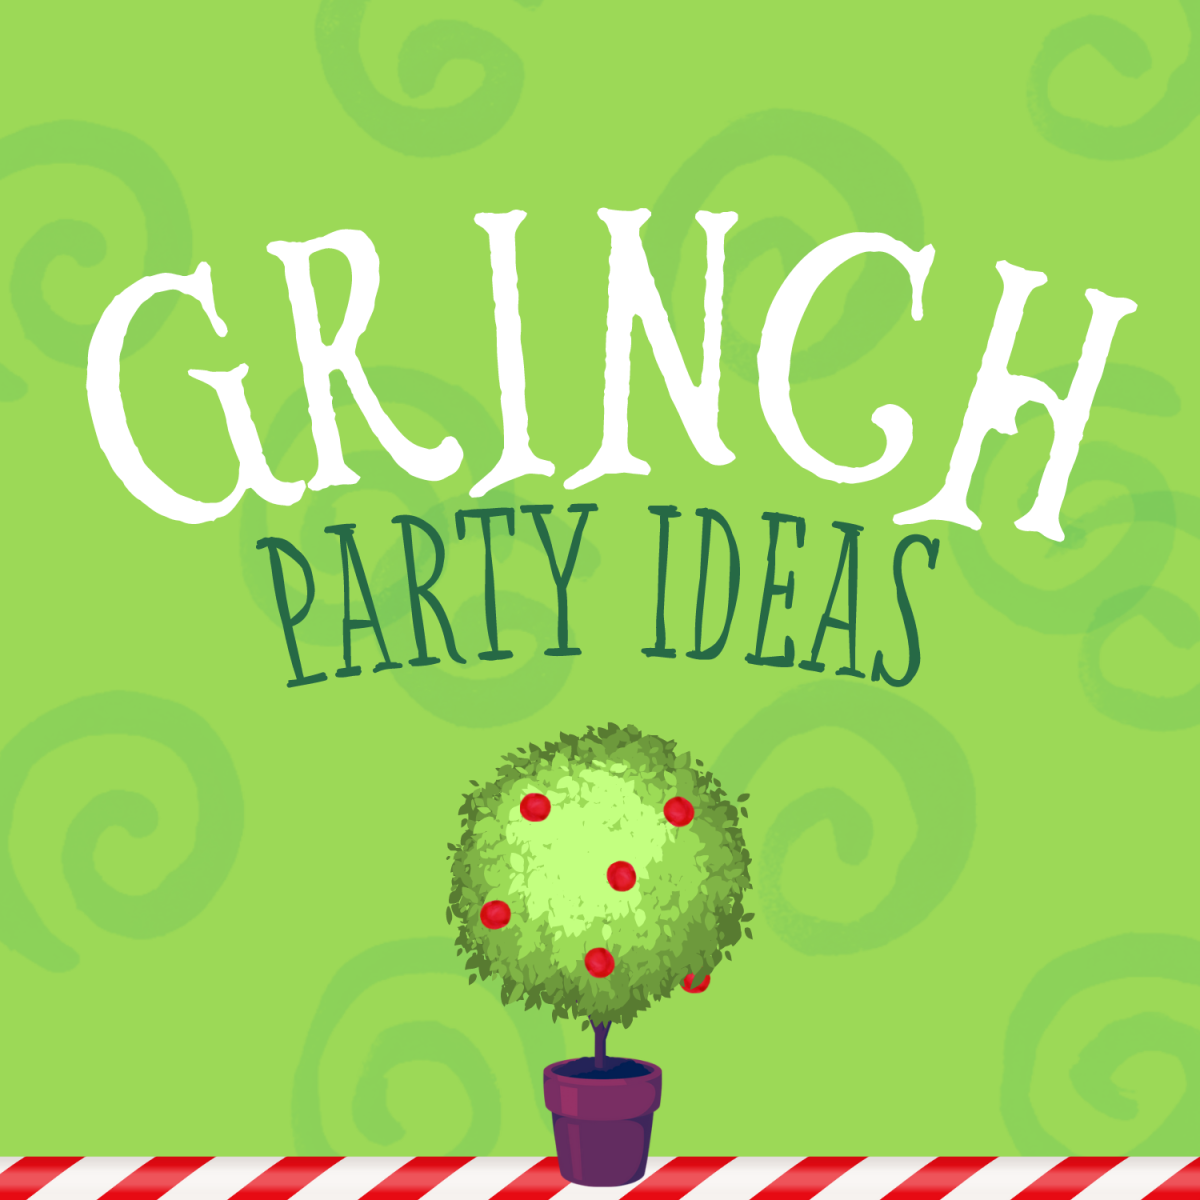 Go for a Grinch theme for your Christmas party this year! Find fun snacks and décor ideas in this article, like these furry green topiary trees!